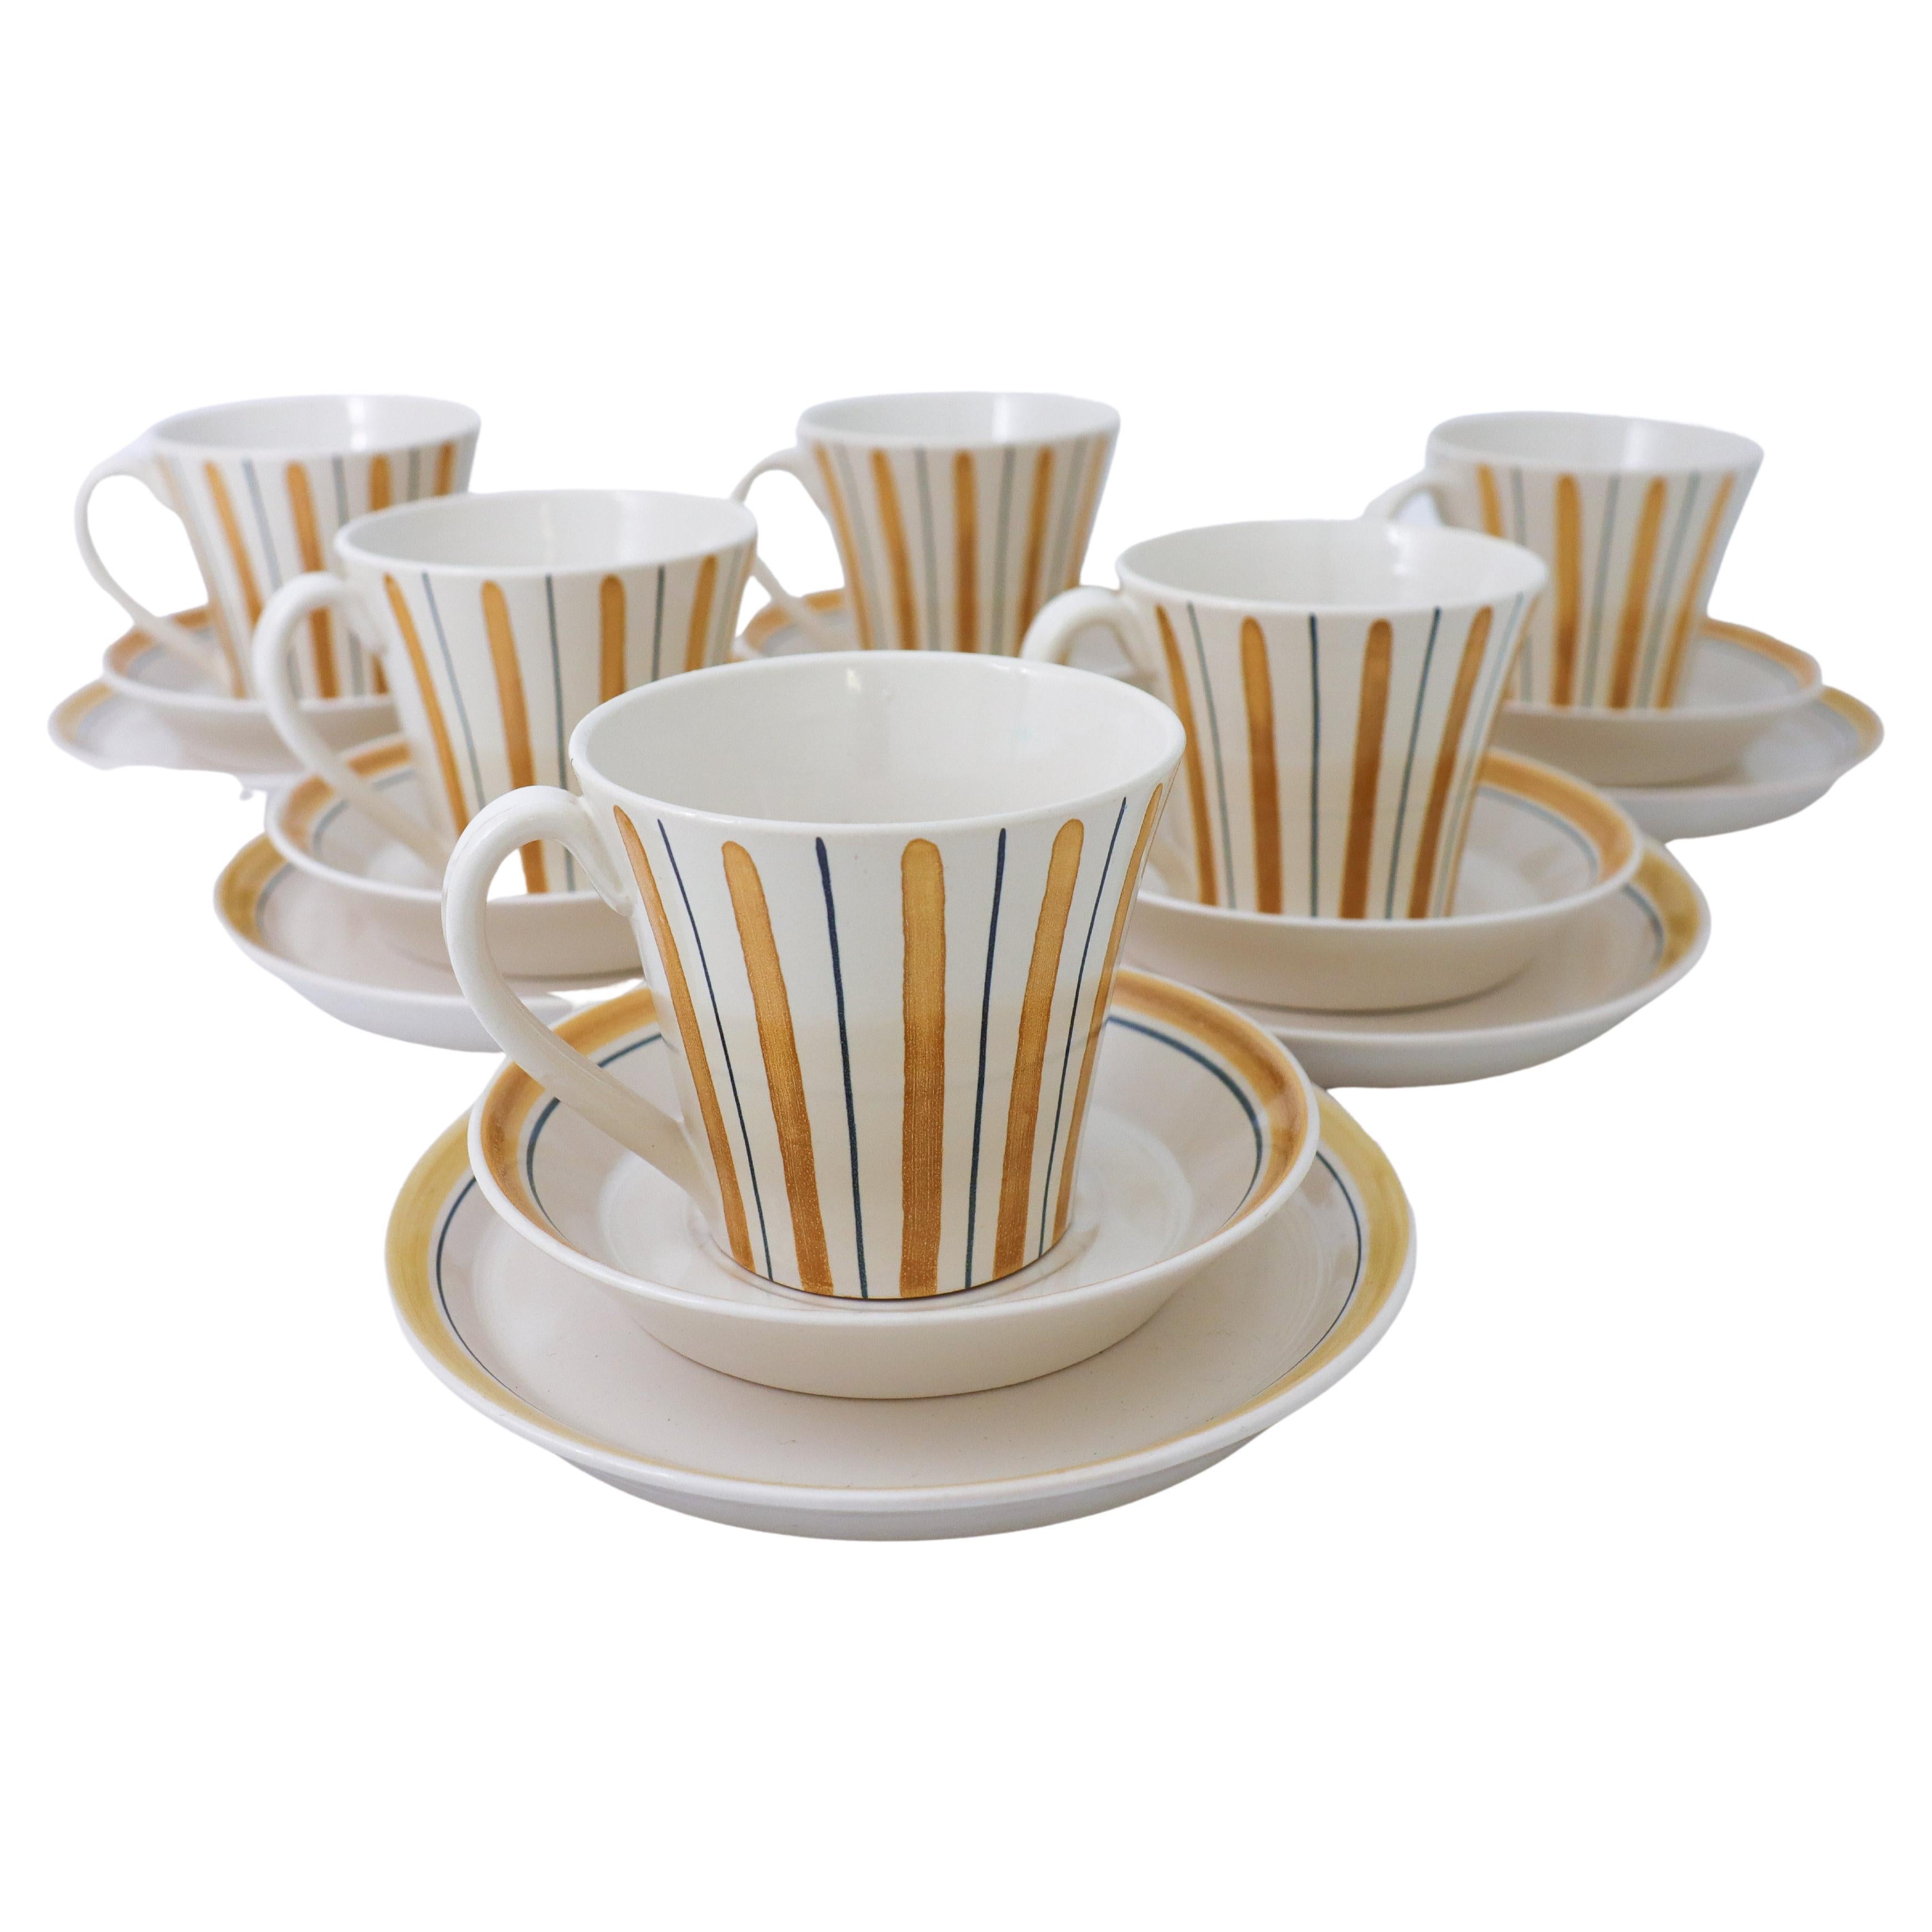 6 Sets of Tea Cups with Saucers & Plates, "Lilja" "Lilly", Bo Fajans, Sweden